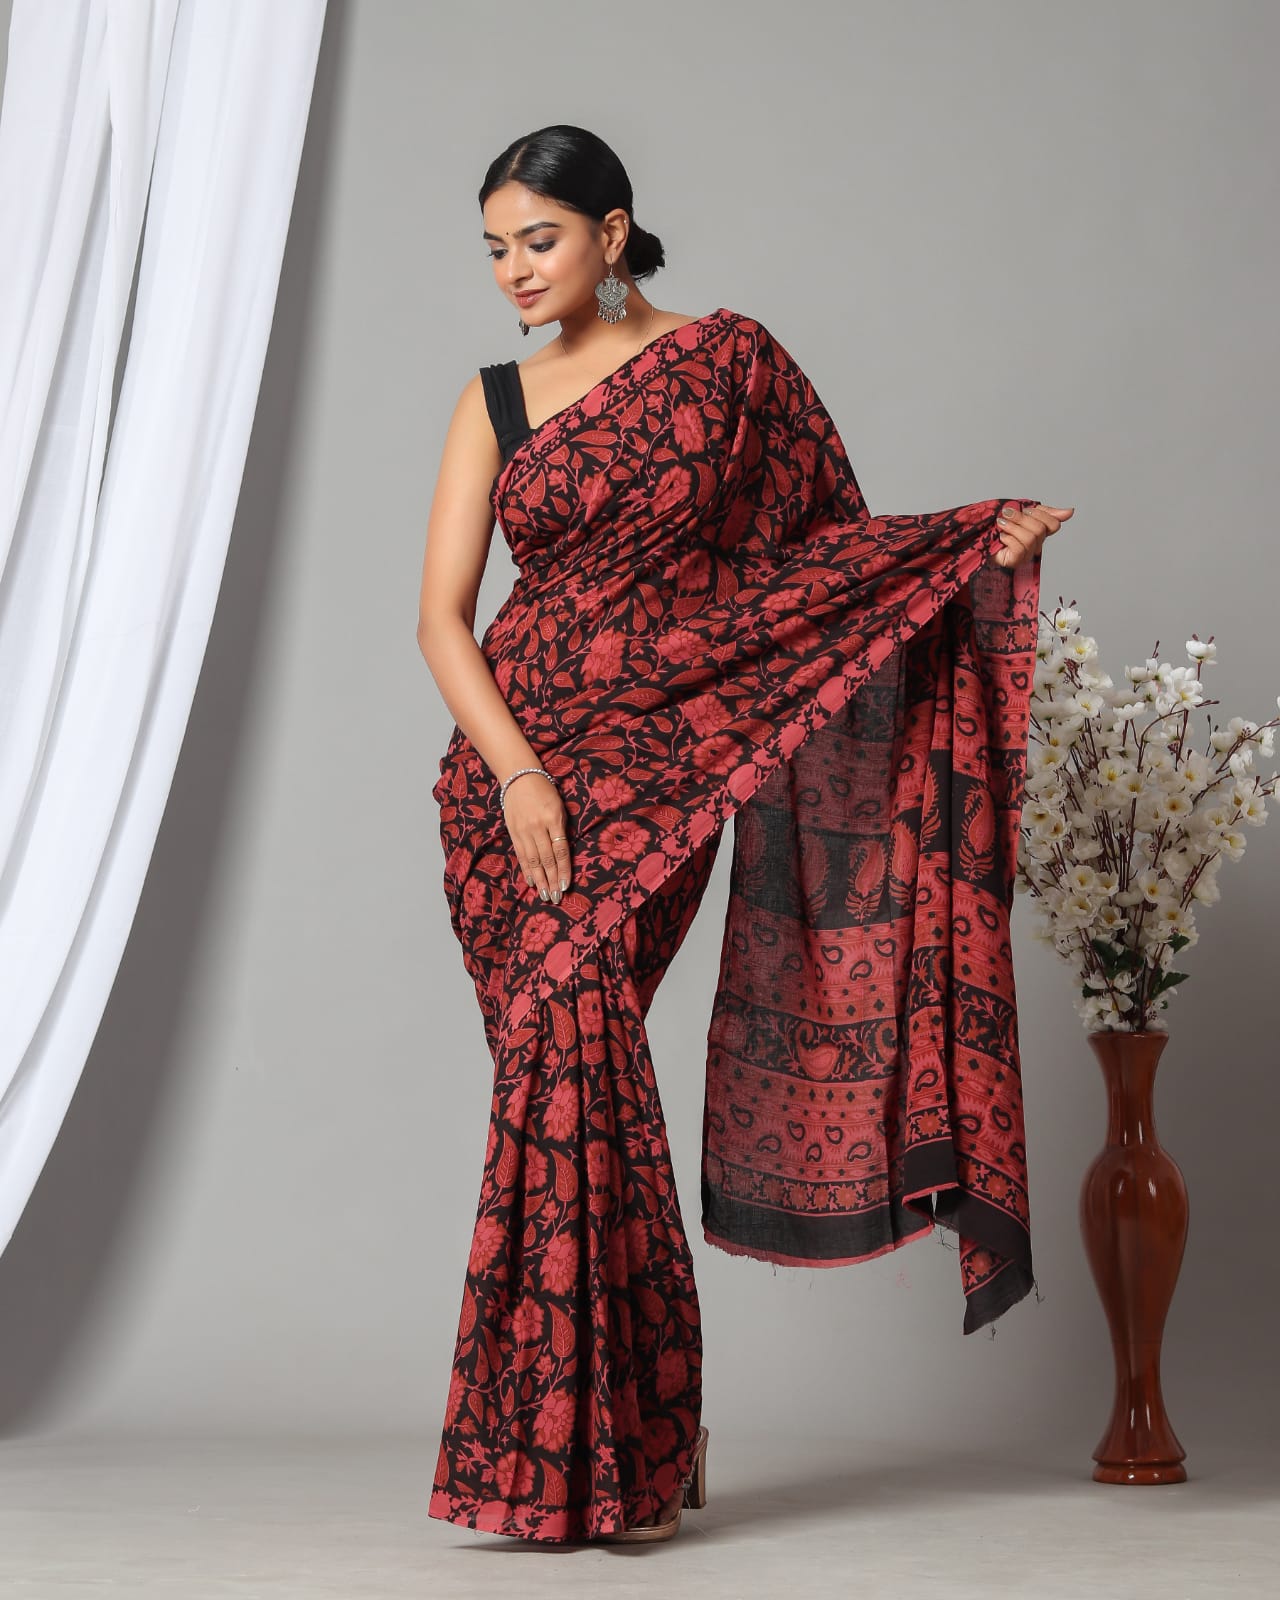 How to wear a Saree to Office | HowTo Select Office Wear Saree and Blouse | Office  Wear Saree | Cotton saree blouse designs, Saree jacket designs, Saree look